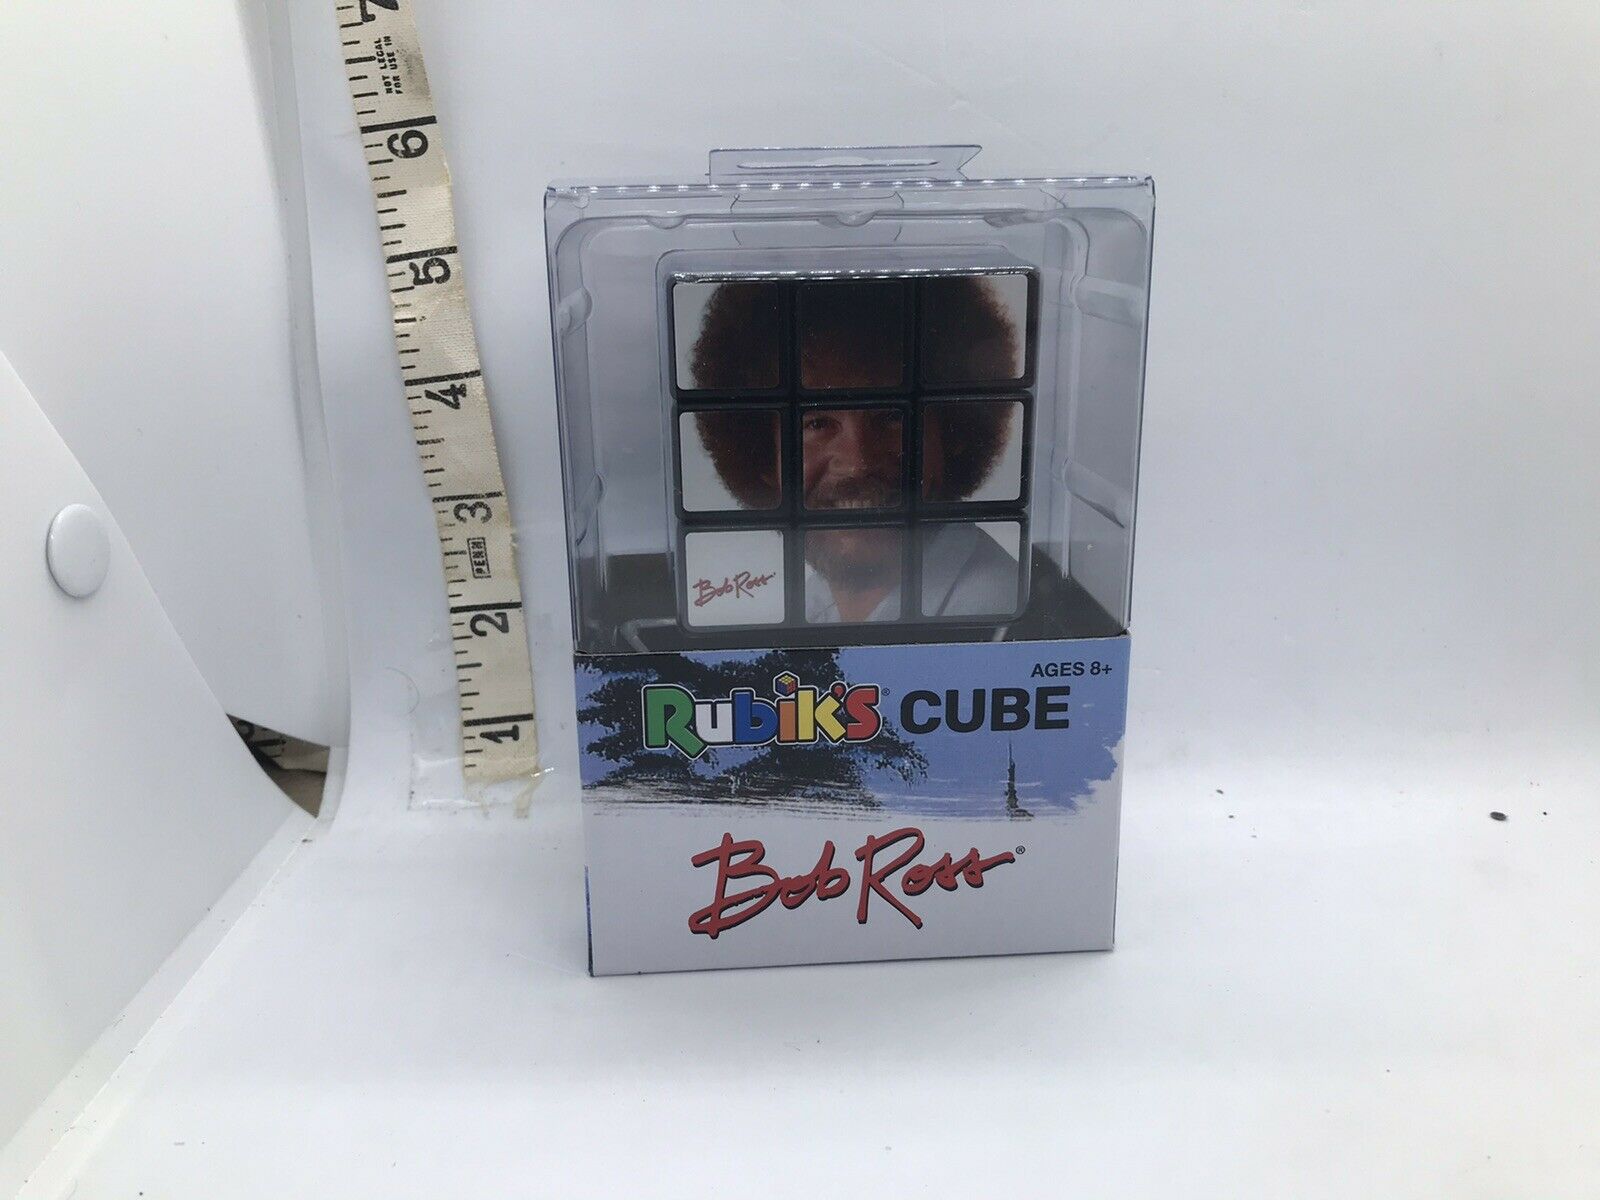 Usaopoly Puzzle Rubik's Cube - Bob Ross New